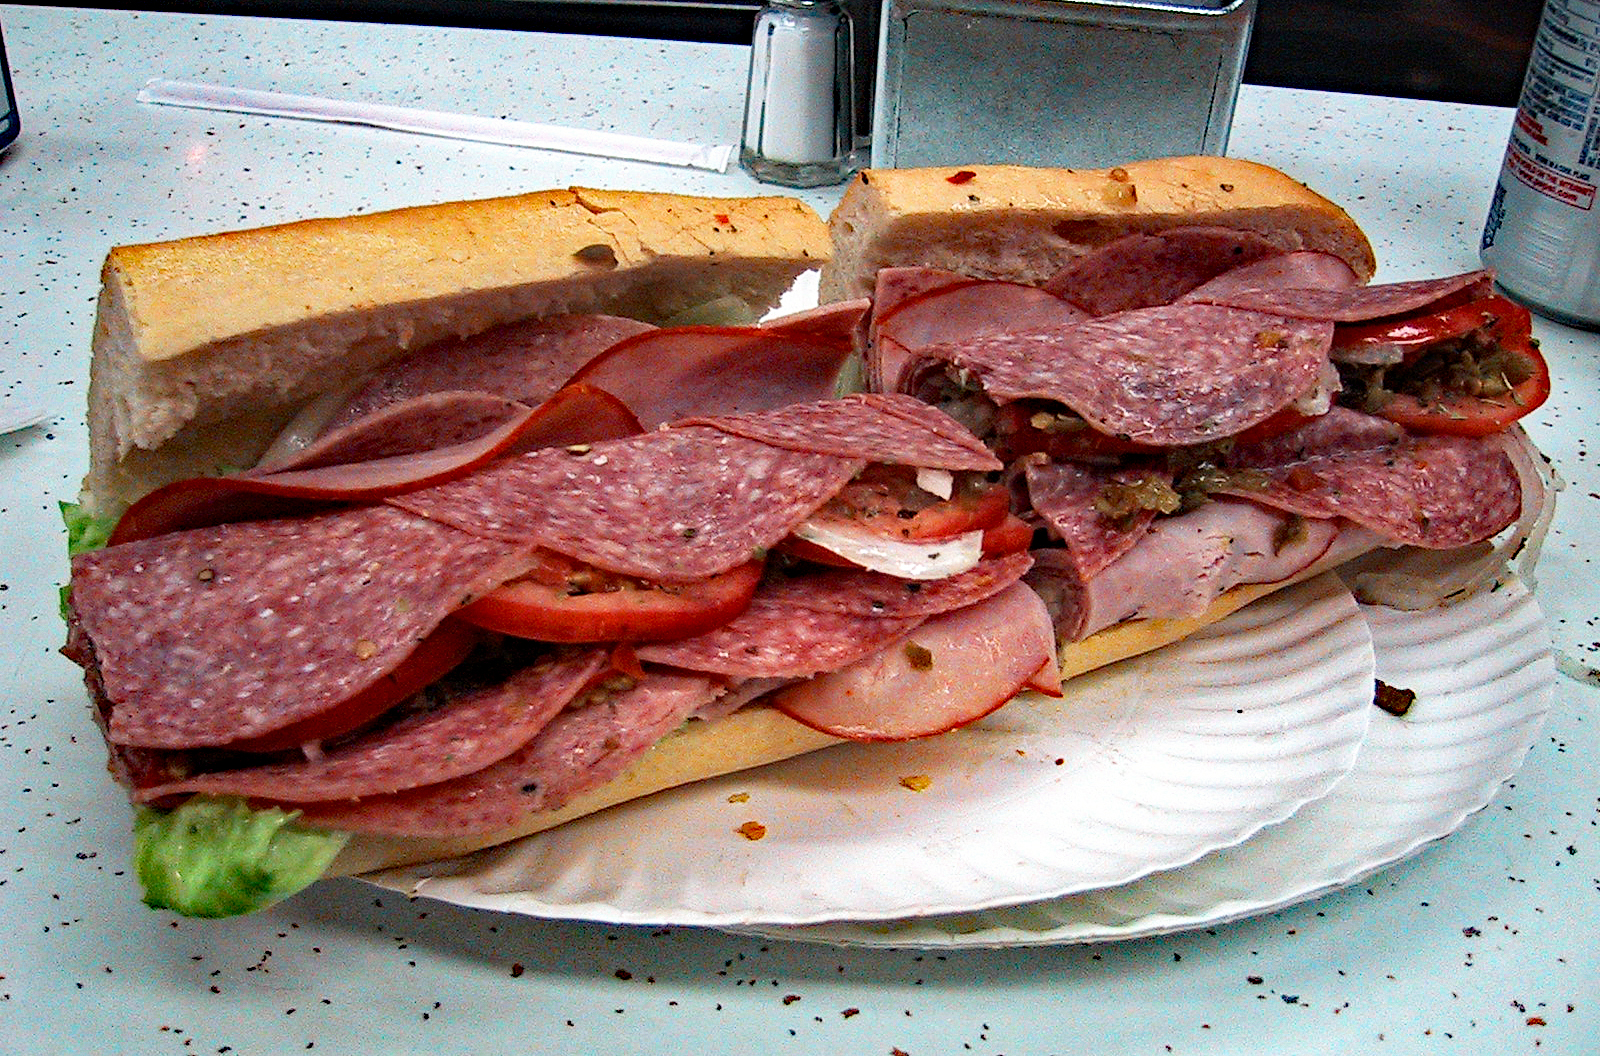 Submarine sandwich overloaded with cold cuts, cheese, and garnishes